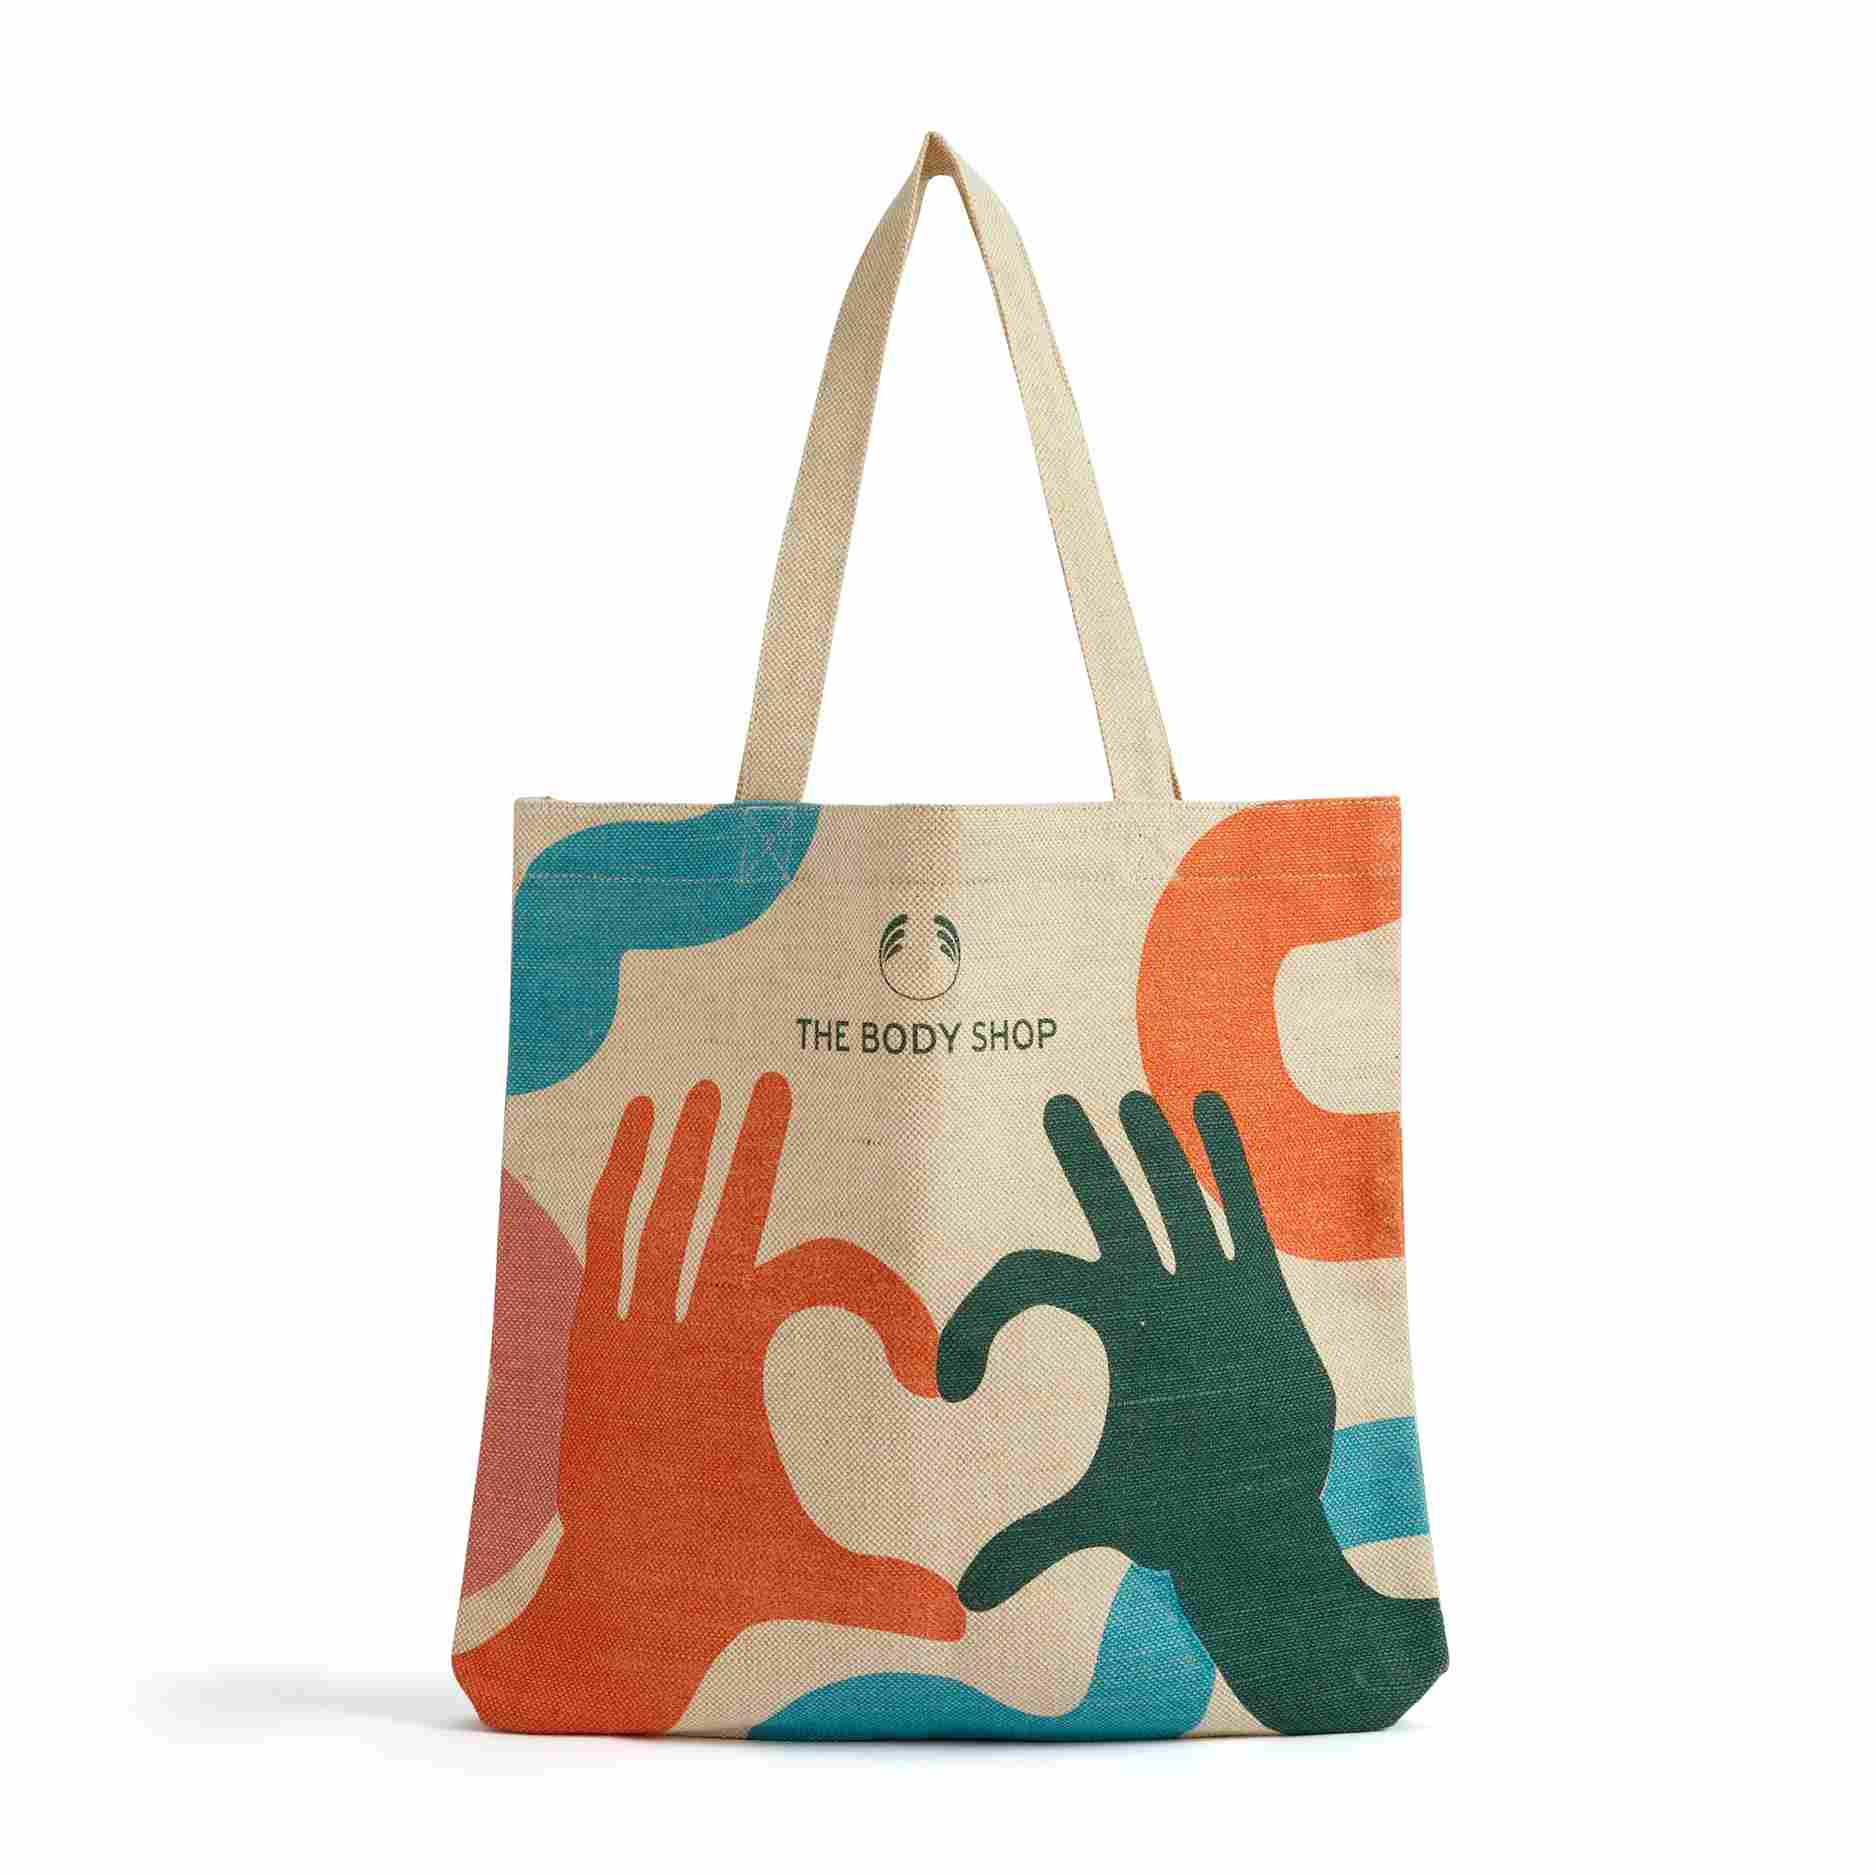 Tote bag. The Body Shop. Eco friendly. Earth Month.